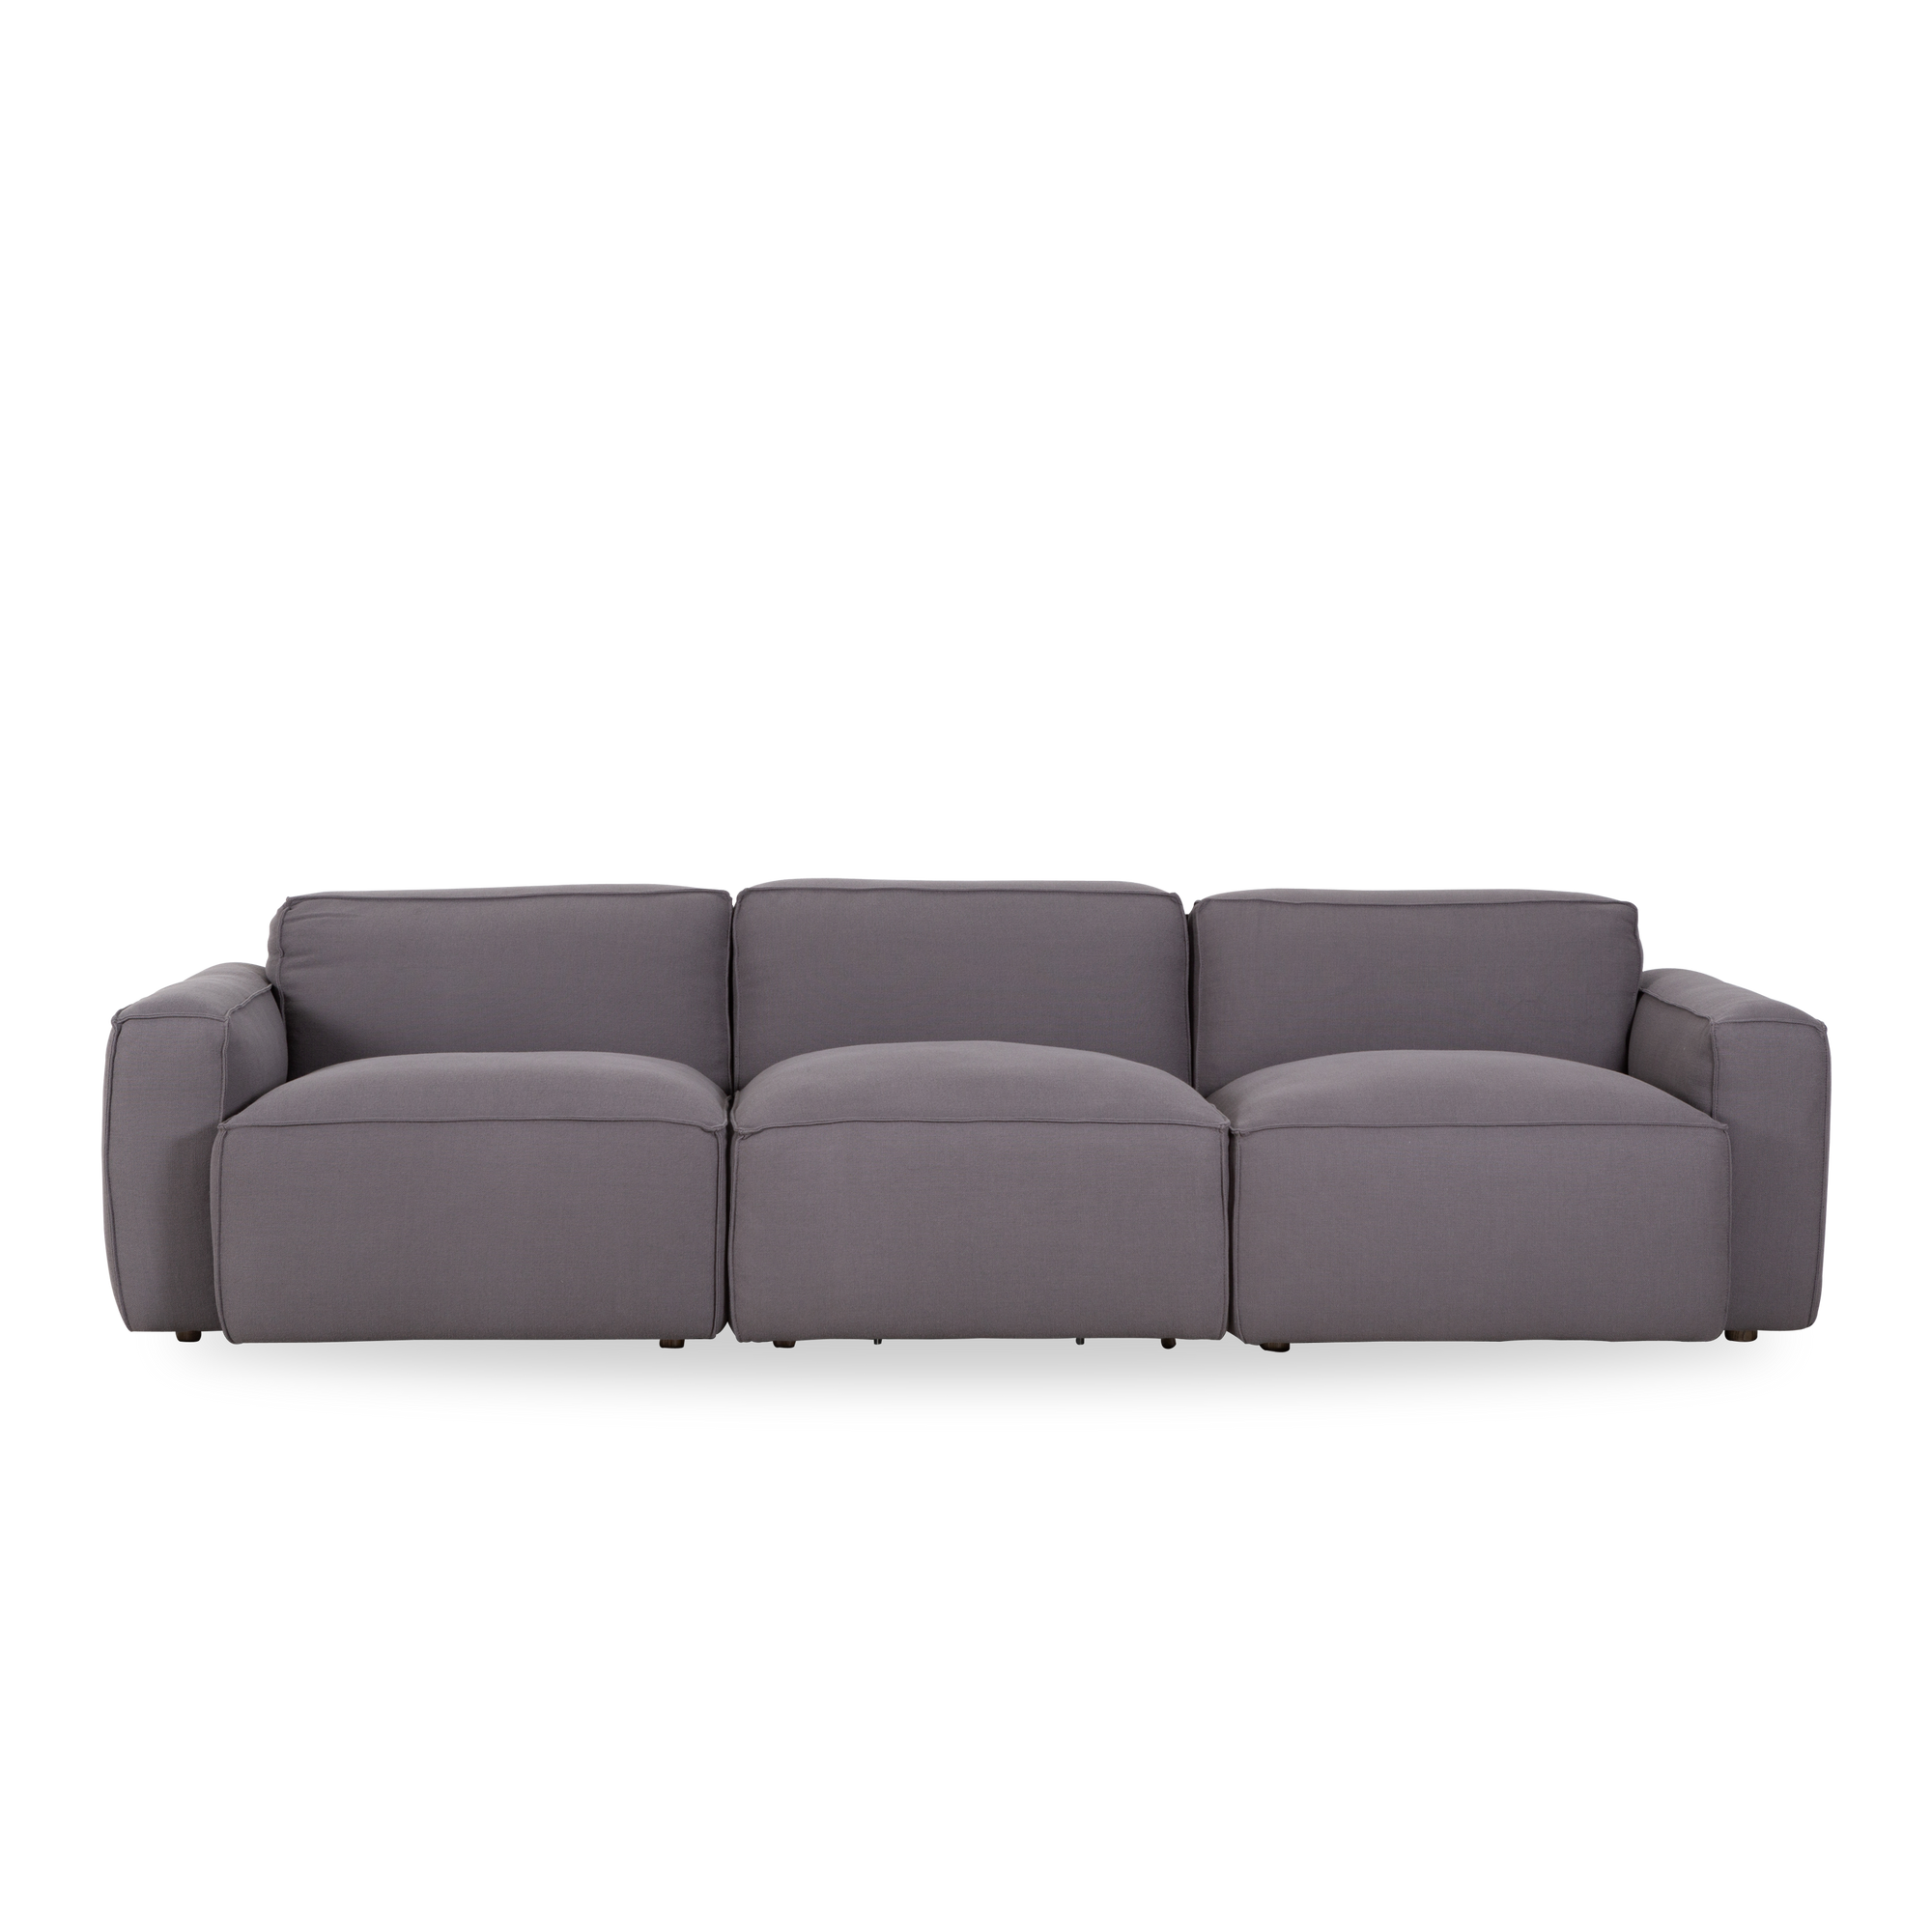 When it comes to true lounging, the Nirvana Medium Sofa is perfect for sitting, lying, leaning and draping in comfort.